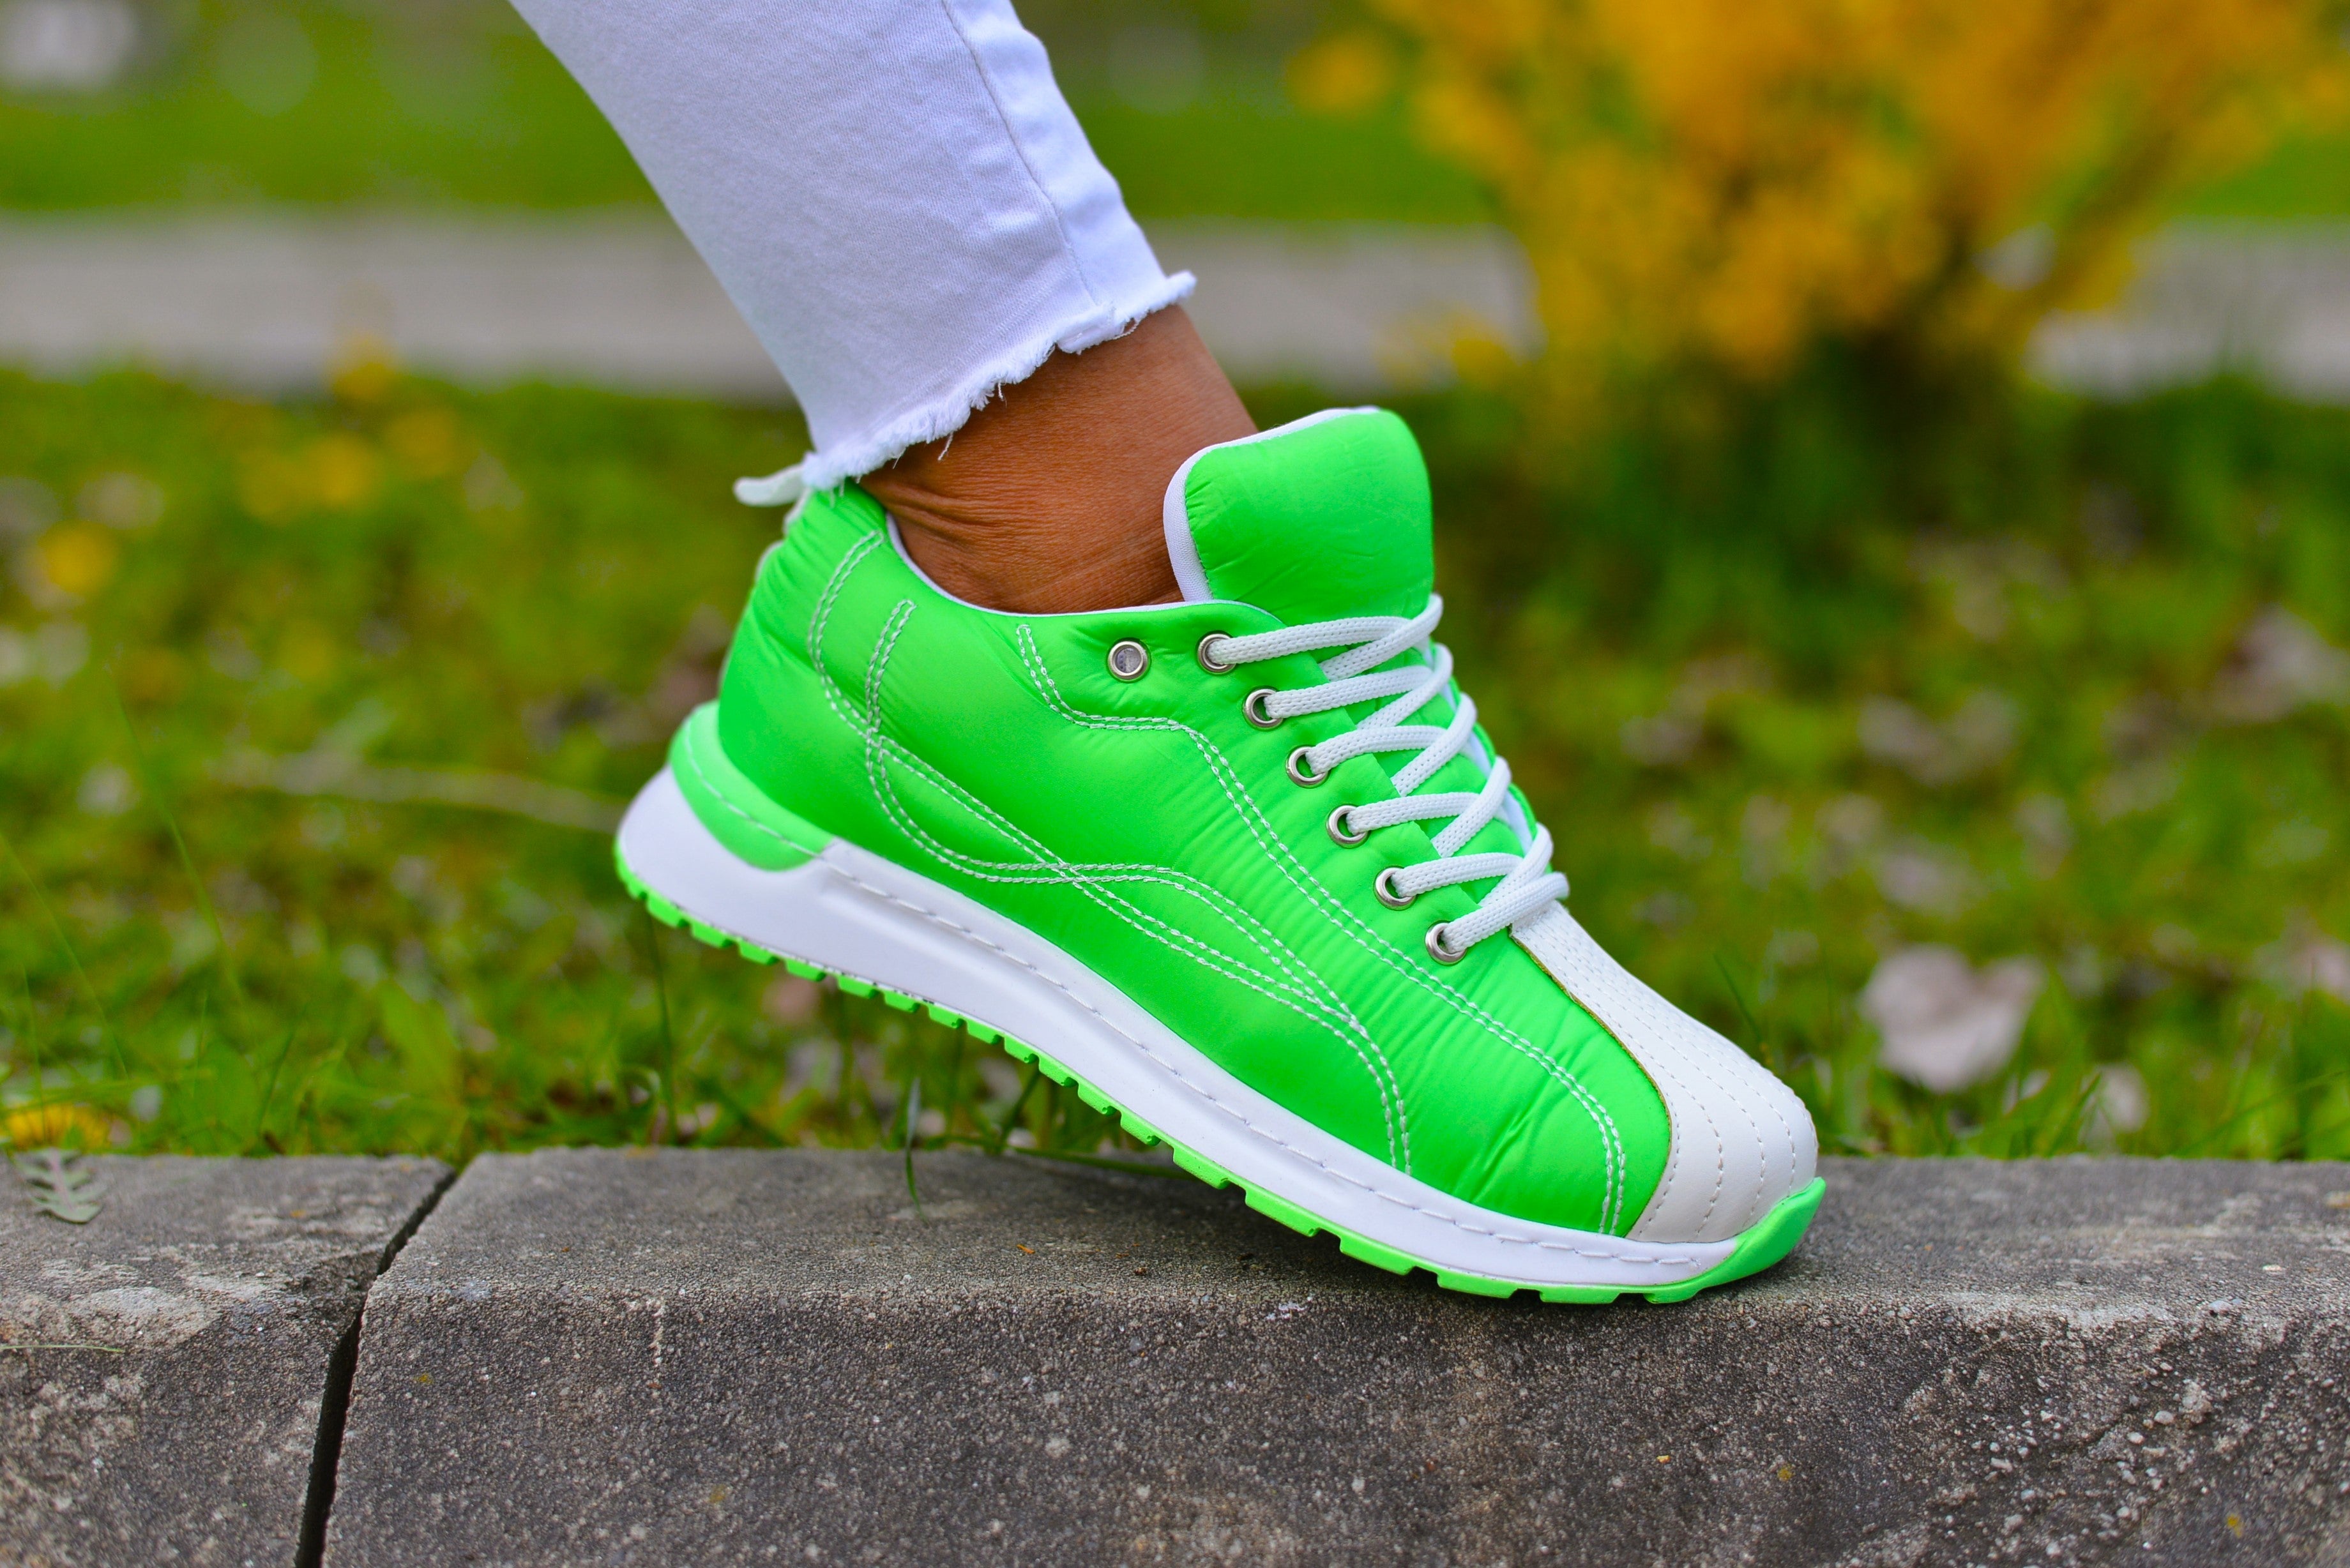 Women's Sneakers Green Neon Verona  Made of Textile Material